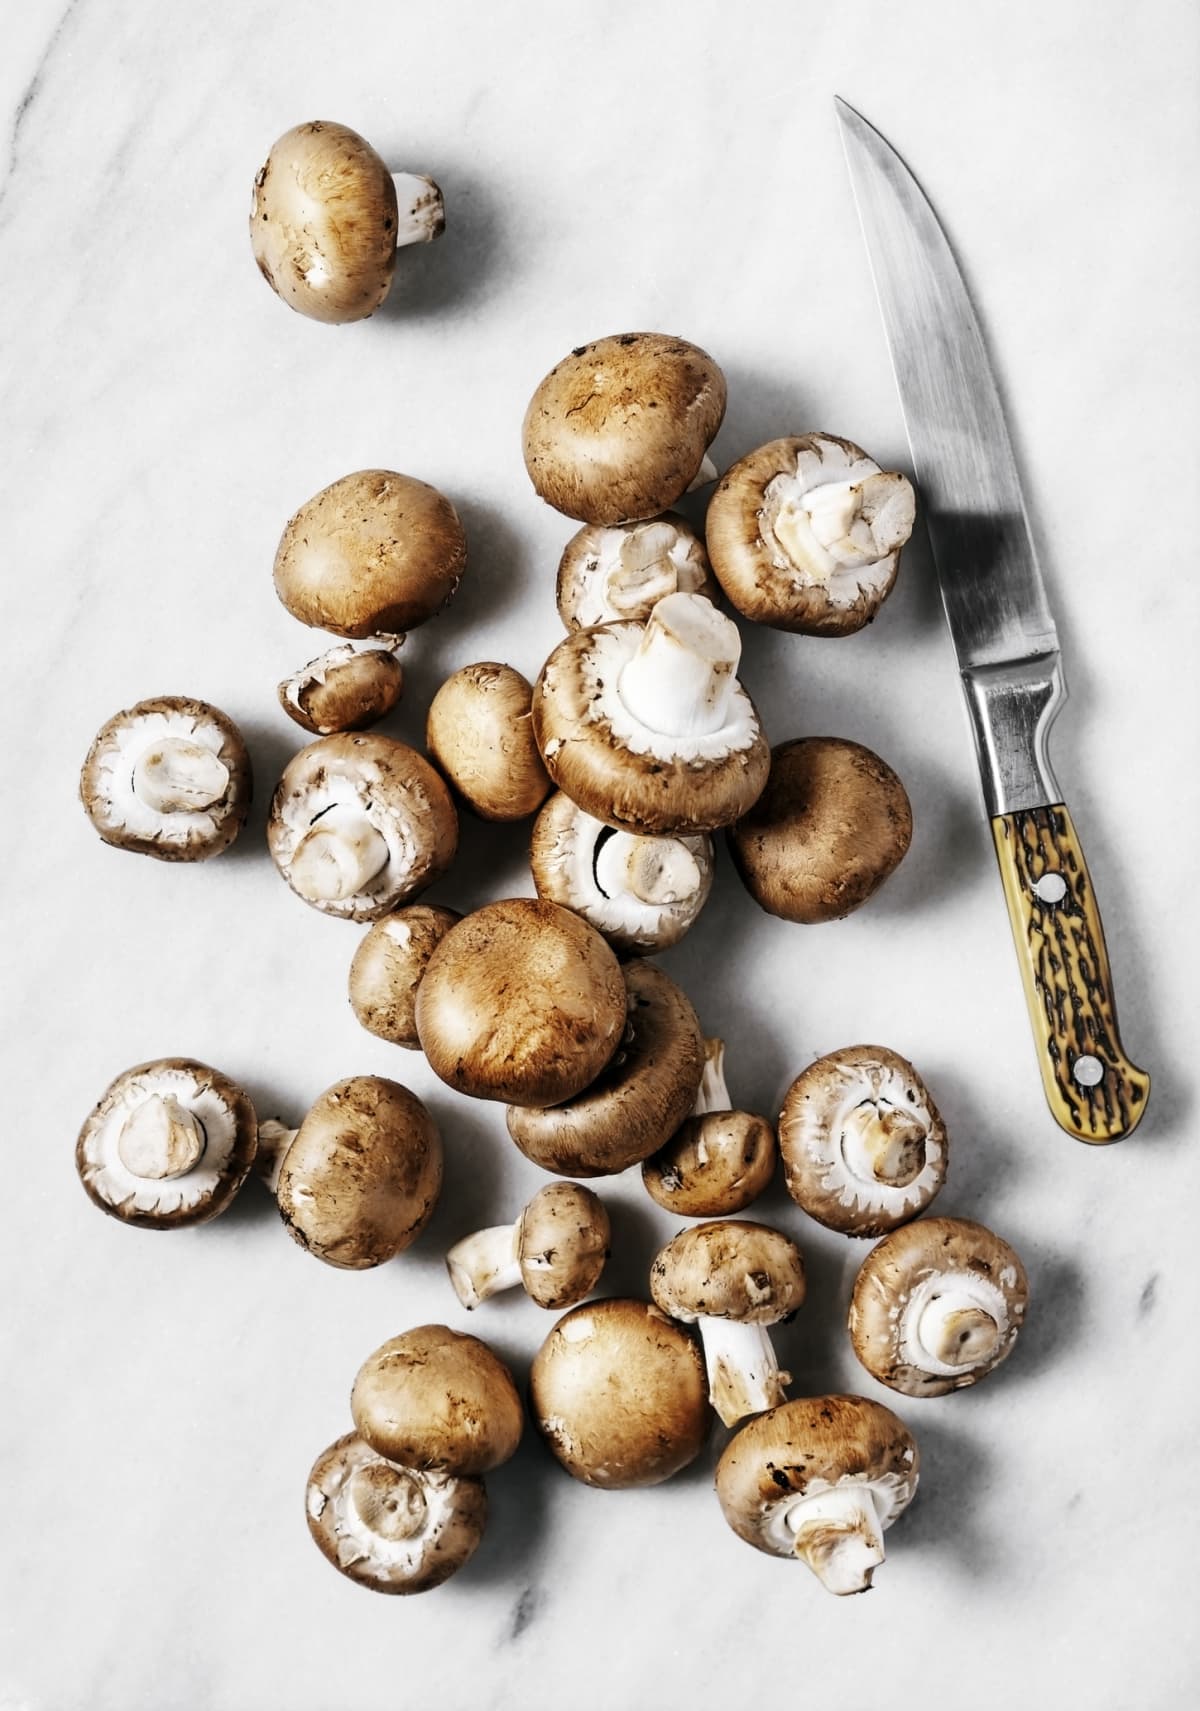 Mushrooms on counter with knife